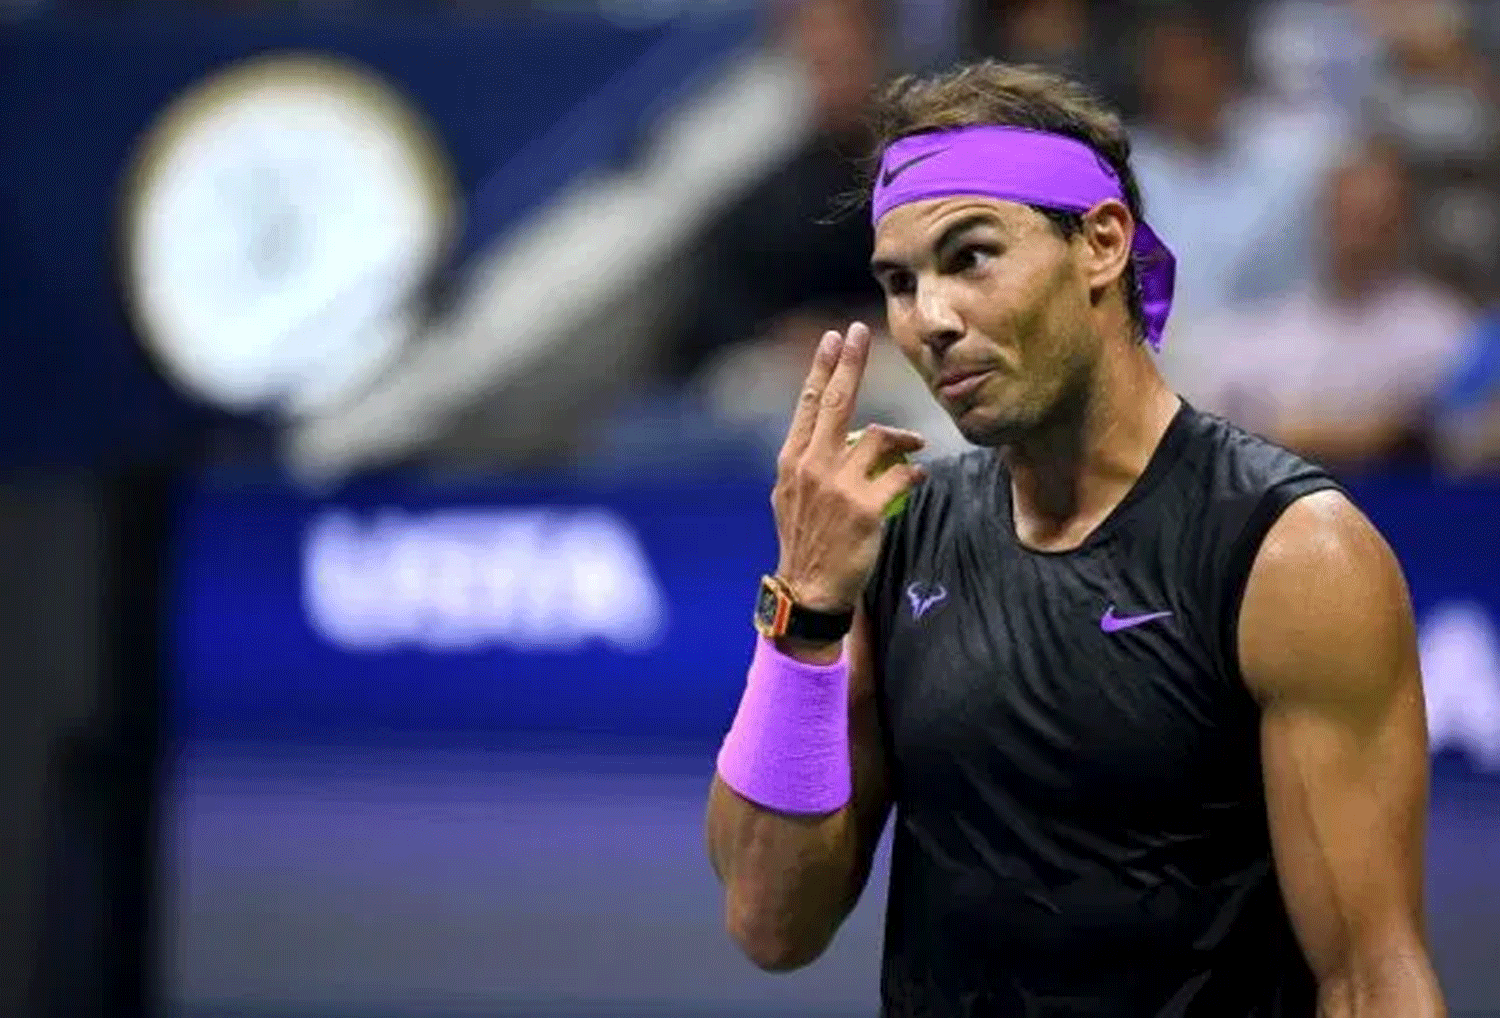 Nadal not ready to play yet due to back issue, skips Dubai event